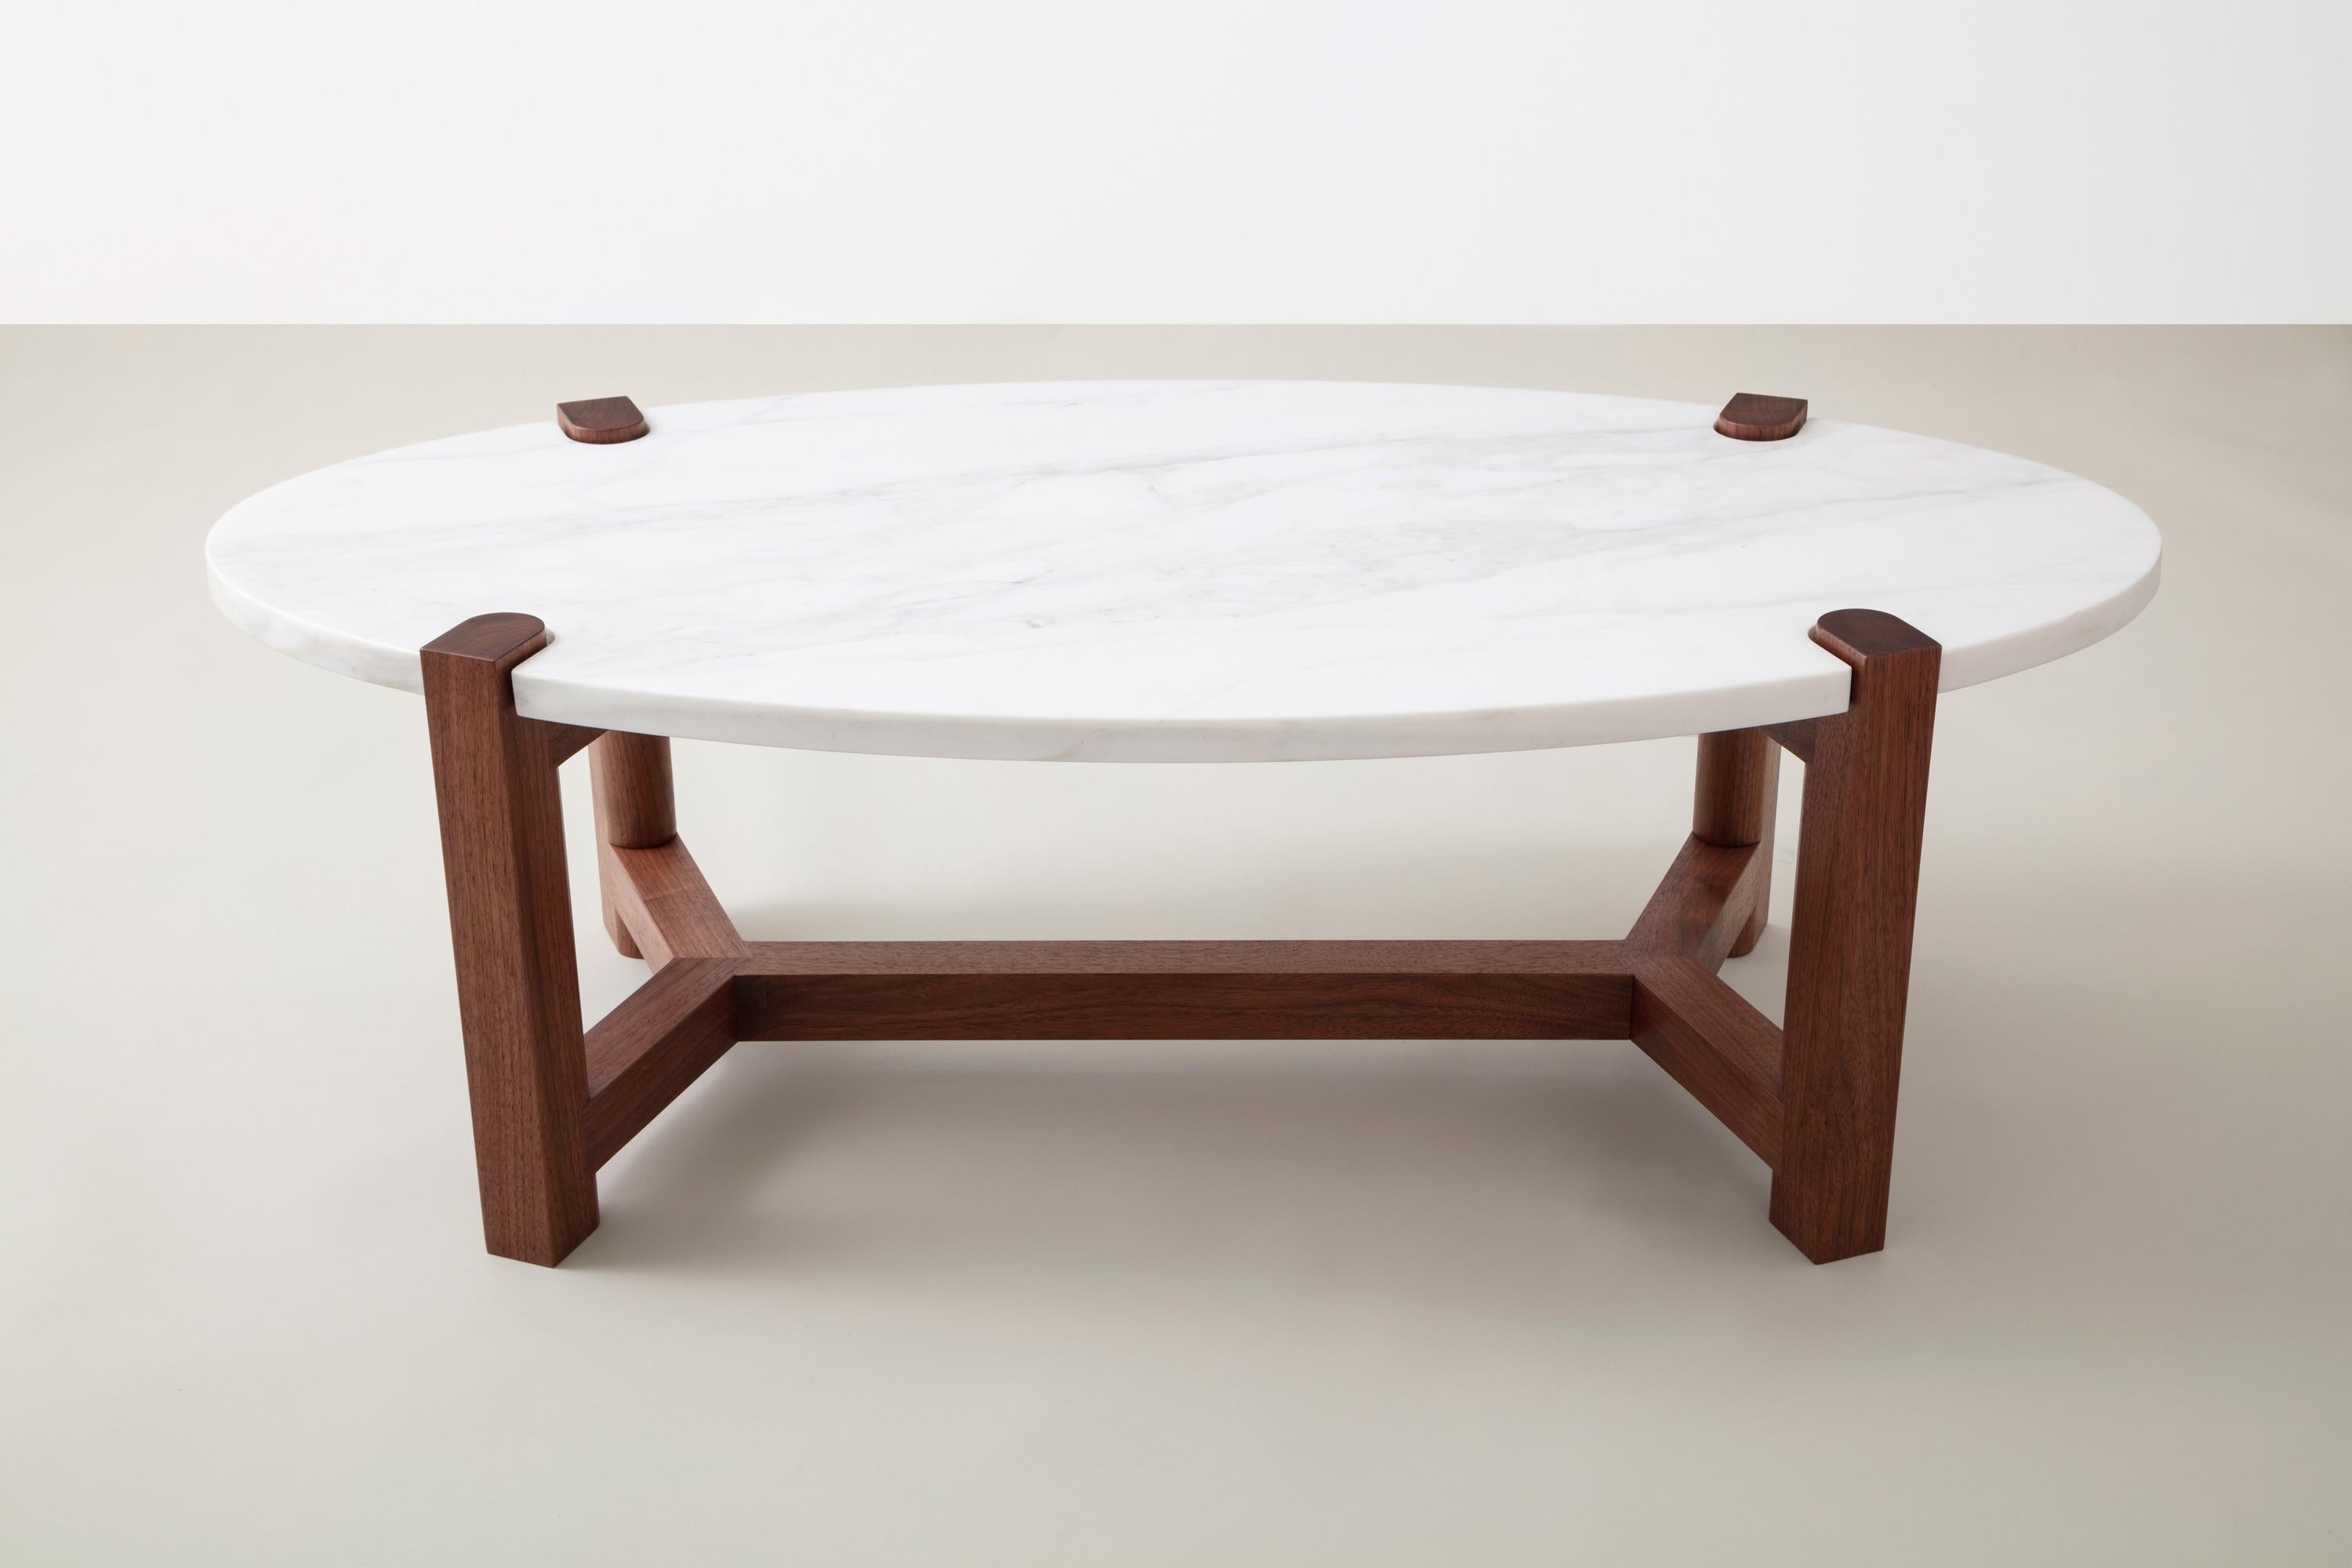 Here details and connections become the focus at the intersection of surface and structure.

Frame shown in American black walnut, also available in cherry, ash, or maple.
Top shown in white marble and also available in custom stone and material